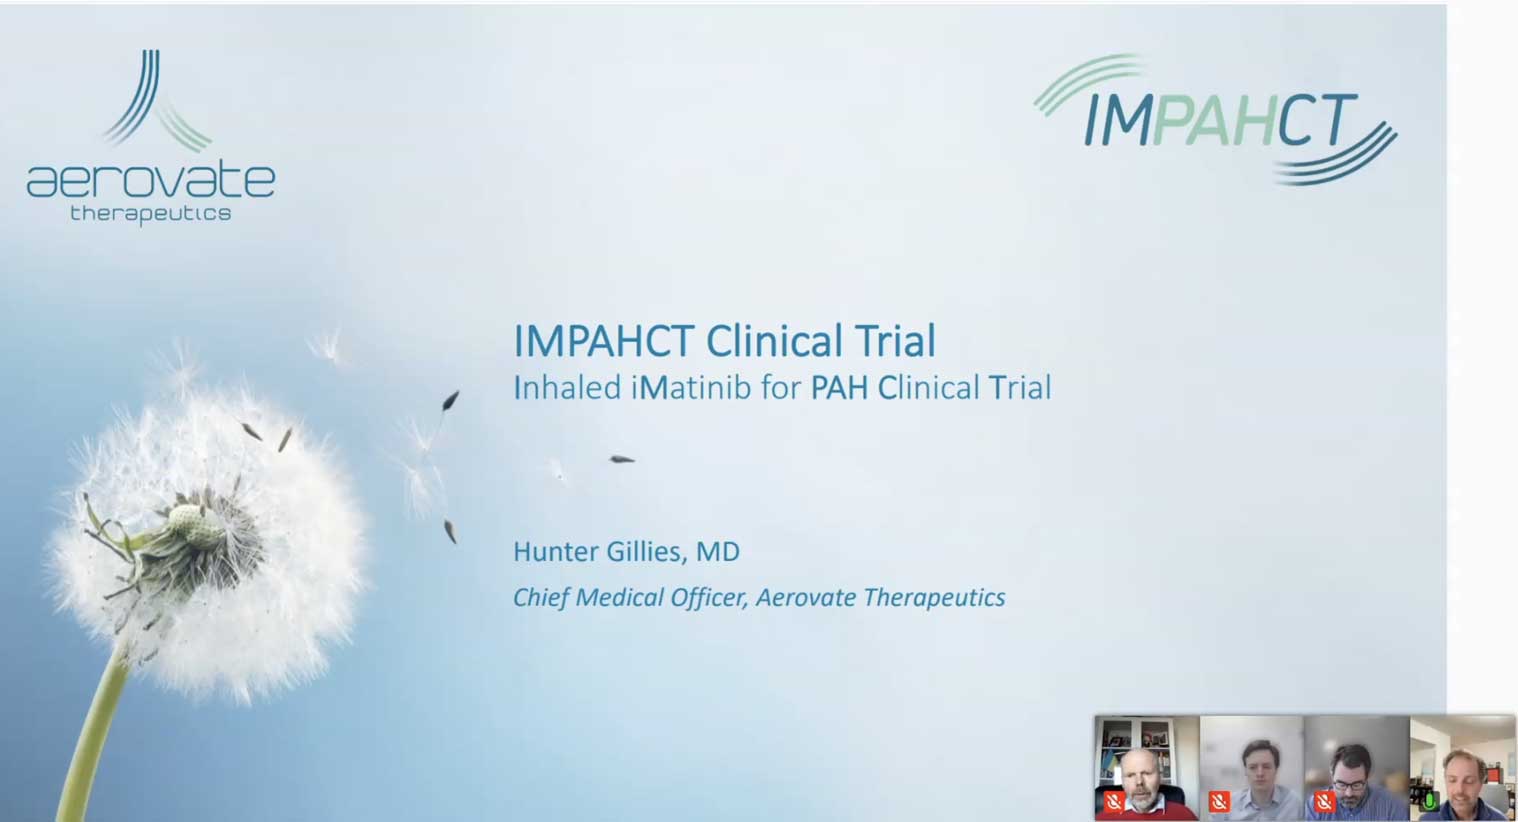 Aerovate Therapeutics - Impahct Clinical Trial